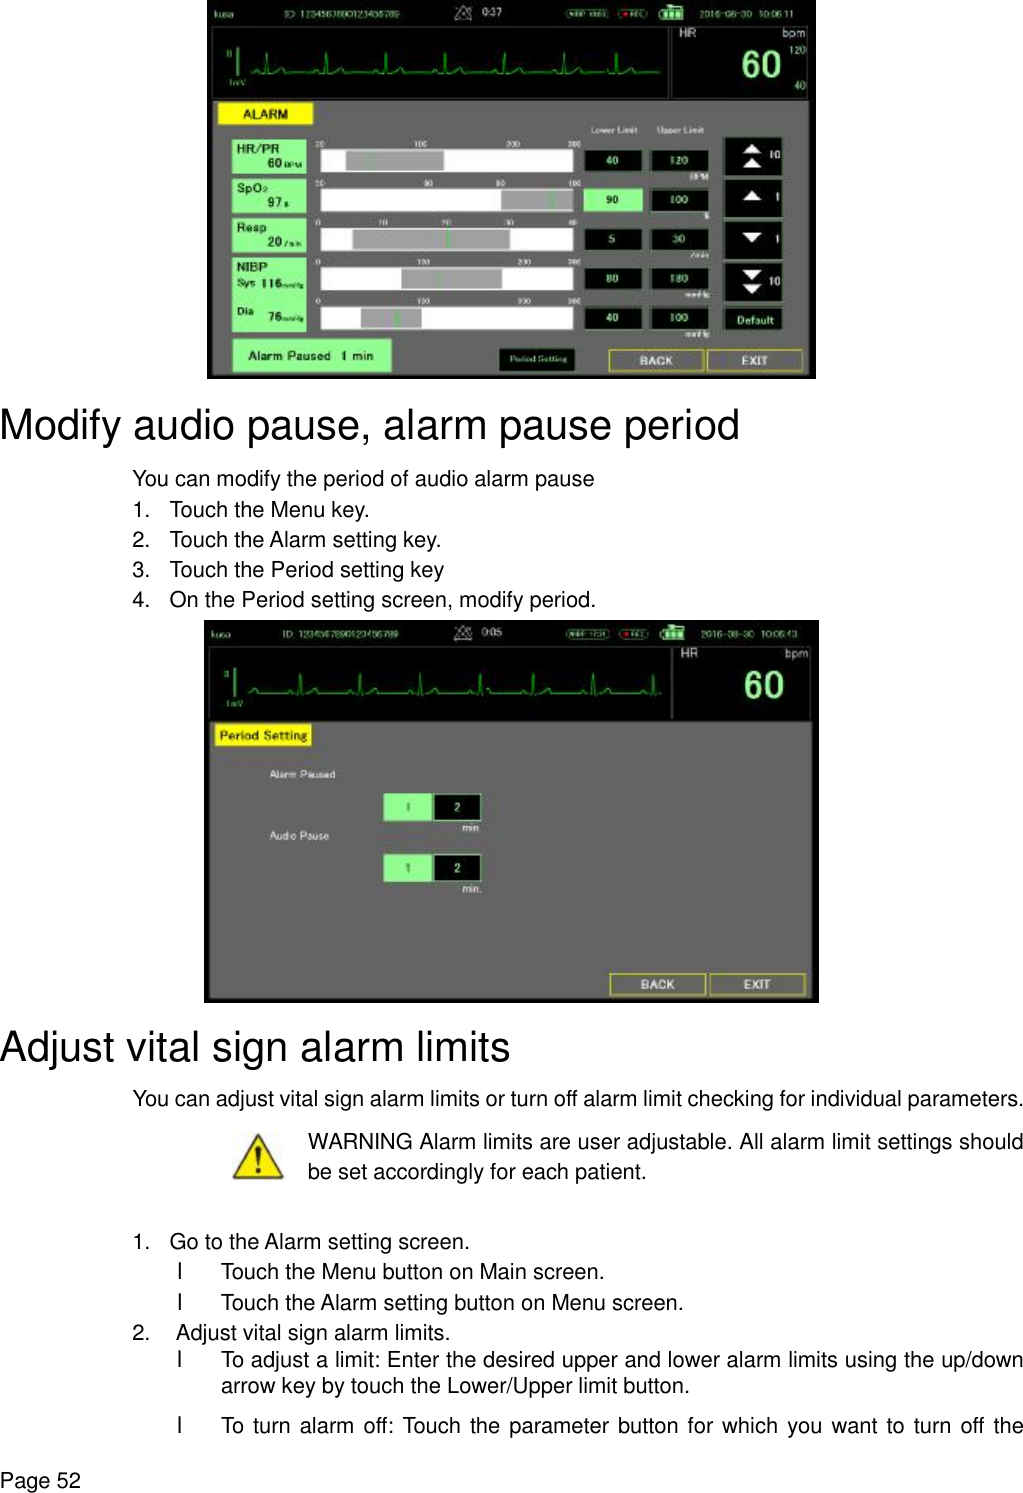    Page 52  Modify audio pause, alarm pause period You can modify the period of audio alarm pause 1. Touch the Menu key. 2. Touch the Alarm setting key. 3. Touch the Period setting key 4. On the Period setting screen, modify period.  Adjust vital sign alarm limits You can adjust vital sign alarm limits or turn off alarm limit checking for individual parameters.  WARNING Alarm limits are user adjustable. All alarm limit settings should be set accordingly for each patient.  1. Go to the Alarm setting screen. l Touch the Menu button on Main screen. l Touch the Alarm setting button on Menu screen. 2. Adjust vital sign alarm limits. l To adjust a limit: Enter the desired upper and lower alarm limits using the up/down arrow key by touch the Lower/Upper limit button. l To turn alarm off: Touch the parameter button for which you want to turn off the 